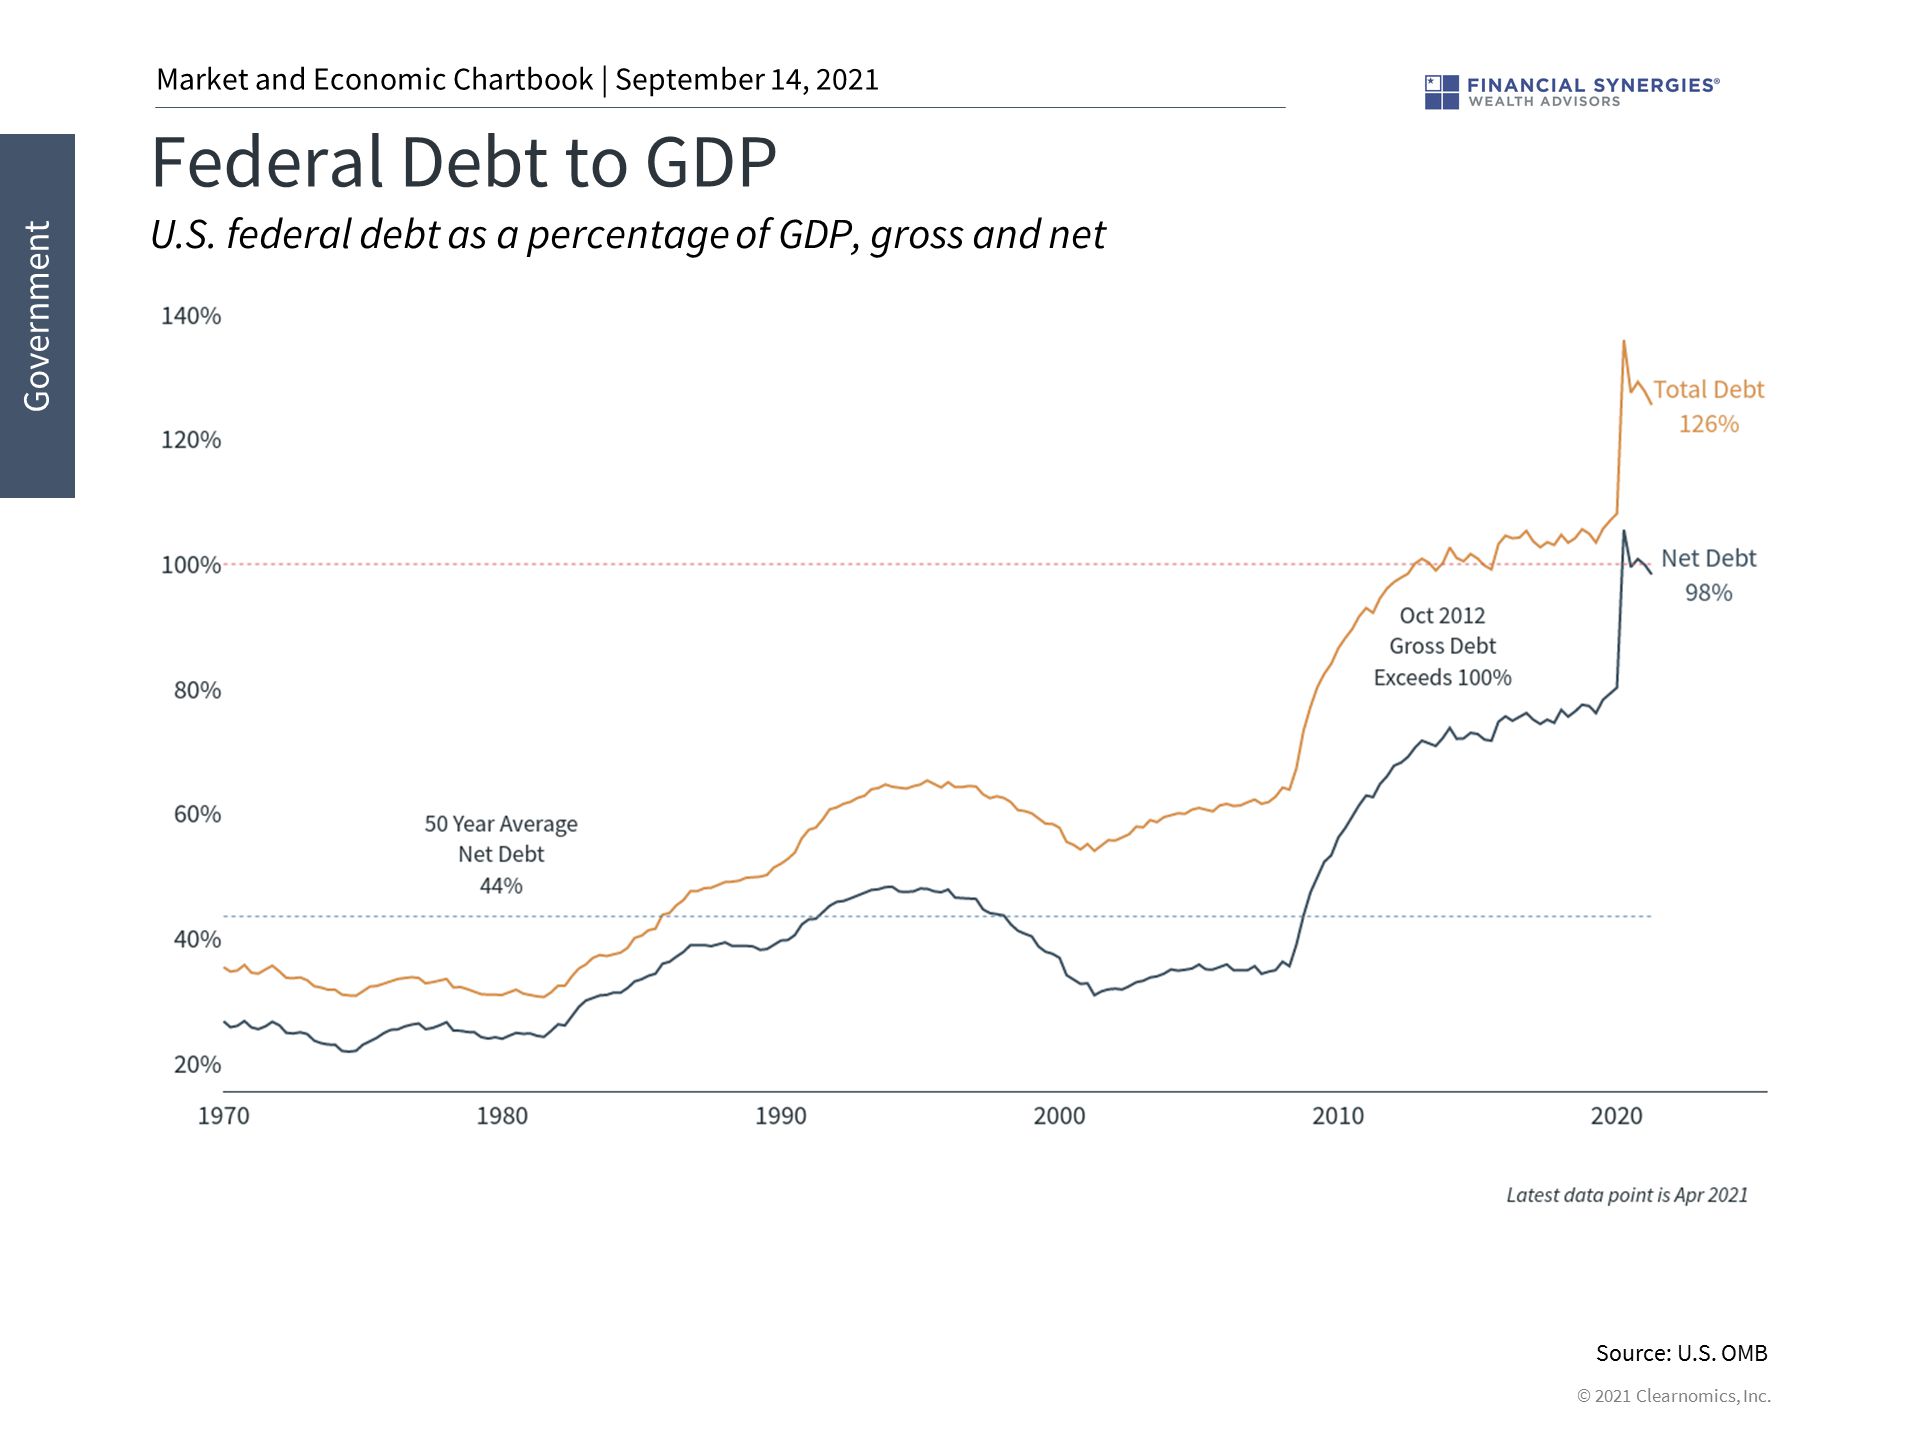 debt to gdp